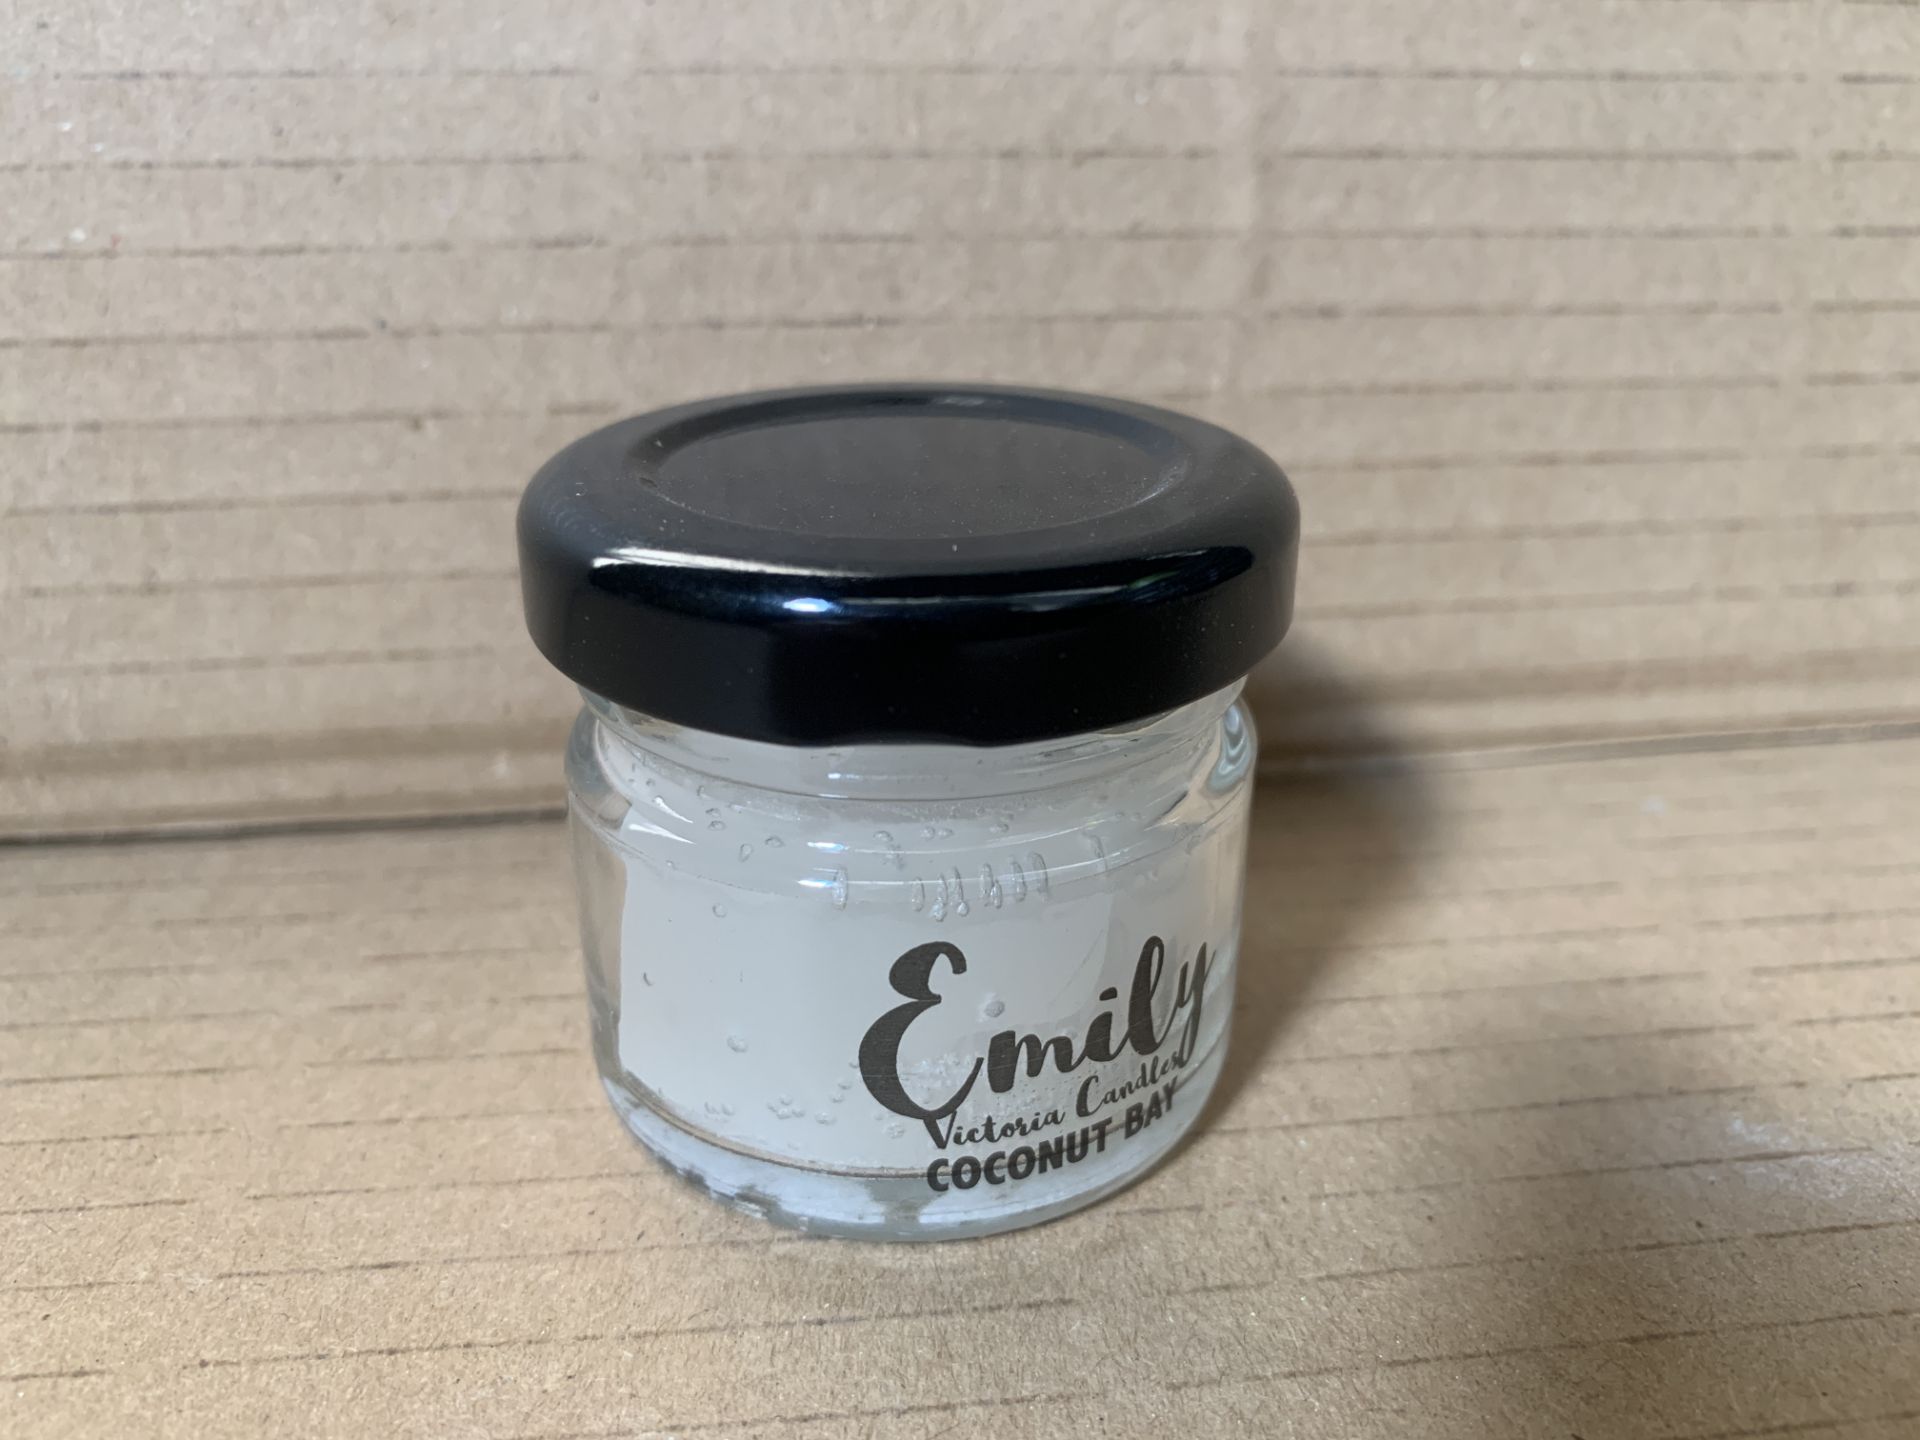 80 X BRAND NEW EMILY COCONUT BAY 20G VICTORIA CANDLES